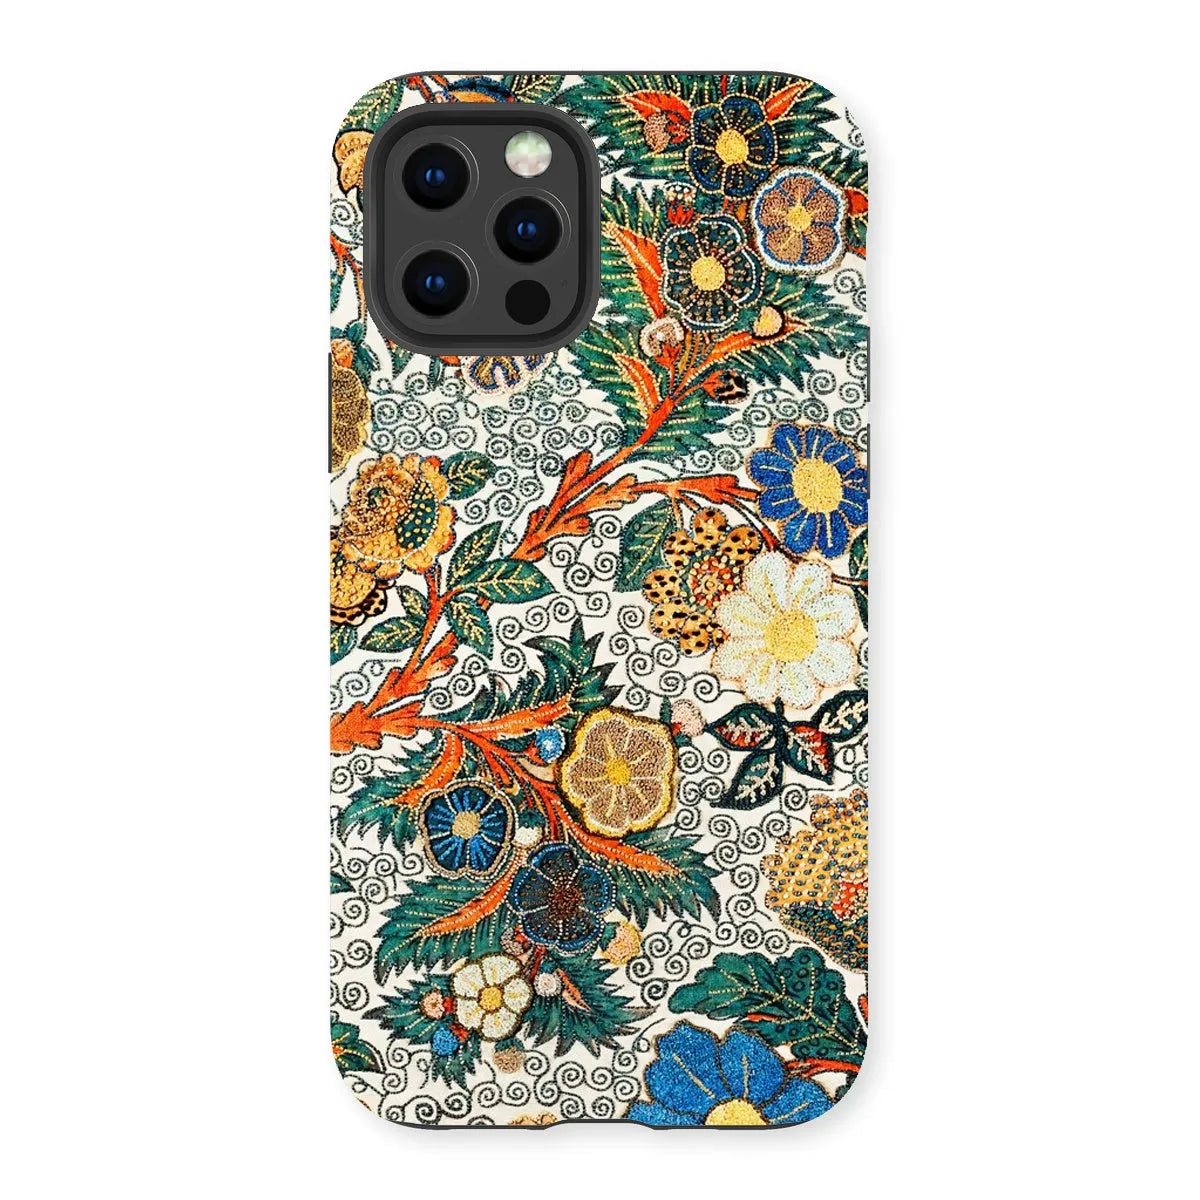 Blossomewhere Japanese Tapestry Art Phone Case - Iphone 13 Pro / Matte - Mobile Phone Cases - Aesthetic Art